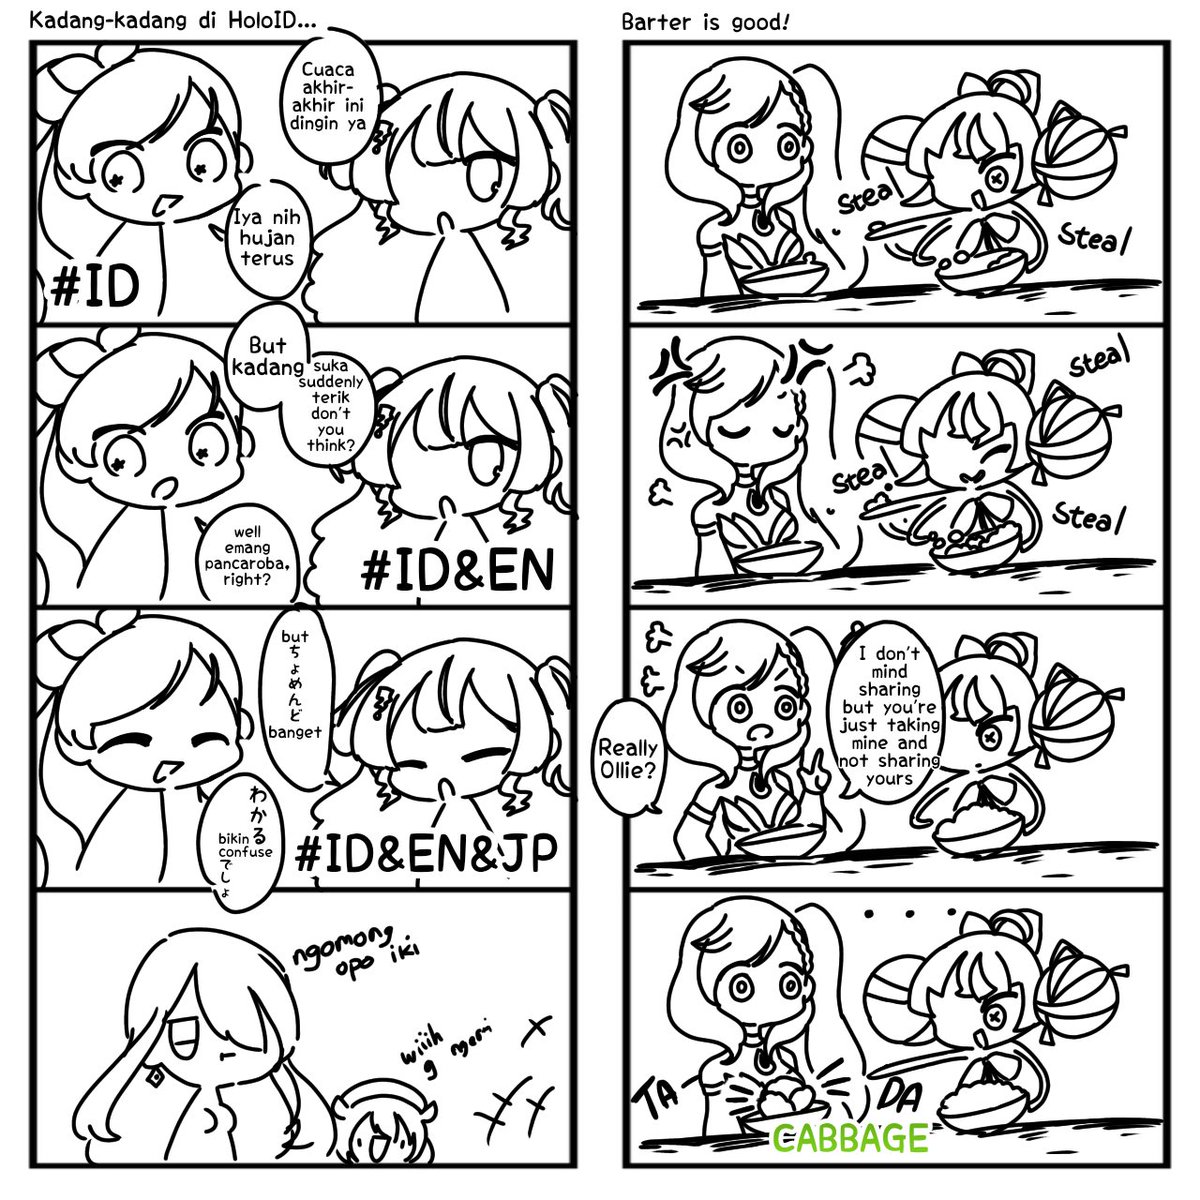 OTSUCRAZY!! THANK YOU FOR COMING TO THE STREAM!! WE MADE 2 STRIPS SO THAT'S NEAT!! SORRY MOST OF MY ART RELATED STORIES ARE UNPLEASANT THO ;; 